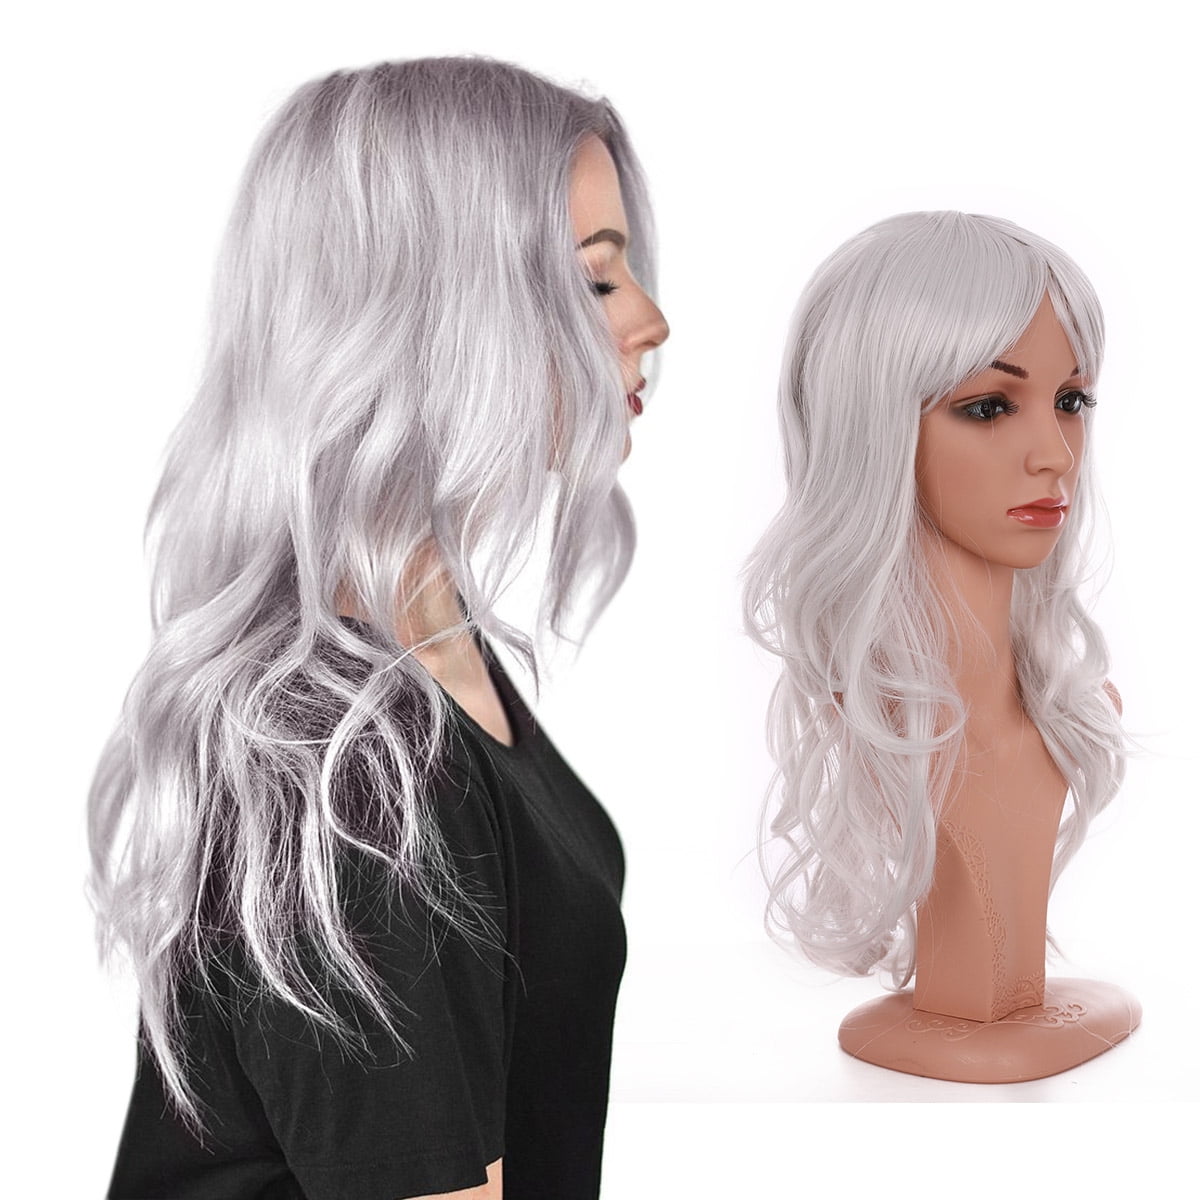 S-noilite Anime Cosplay Synthetic Wig Long Curly Wavy Heat Resistant Fiber  with Bangs for Women 